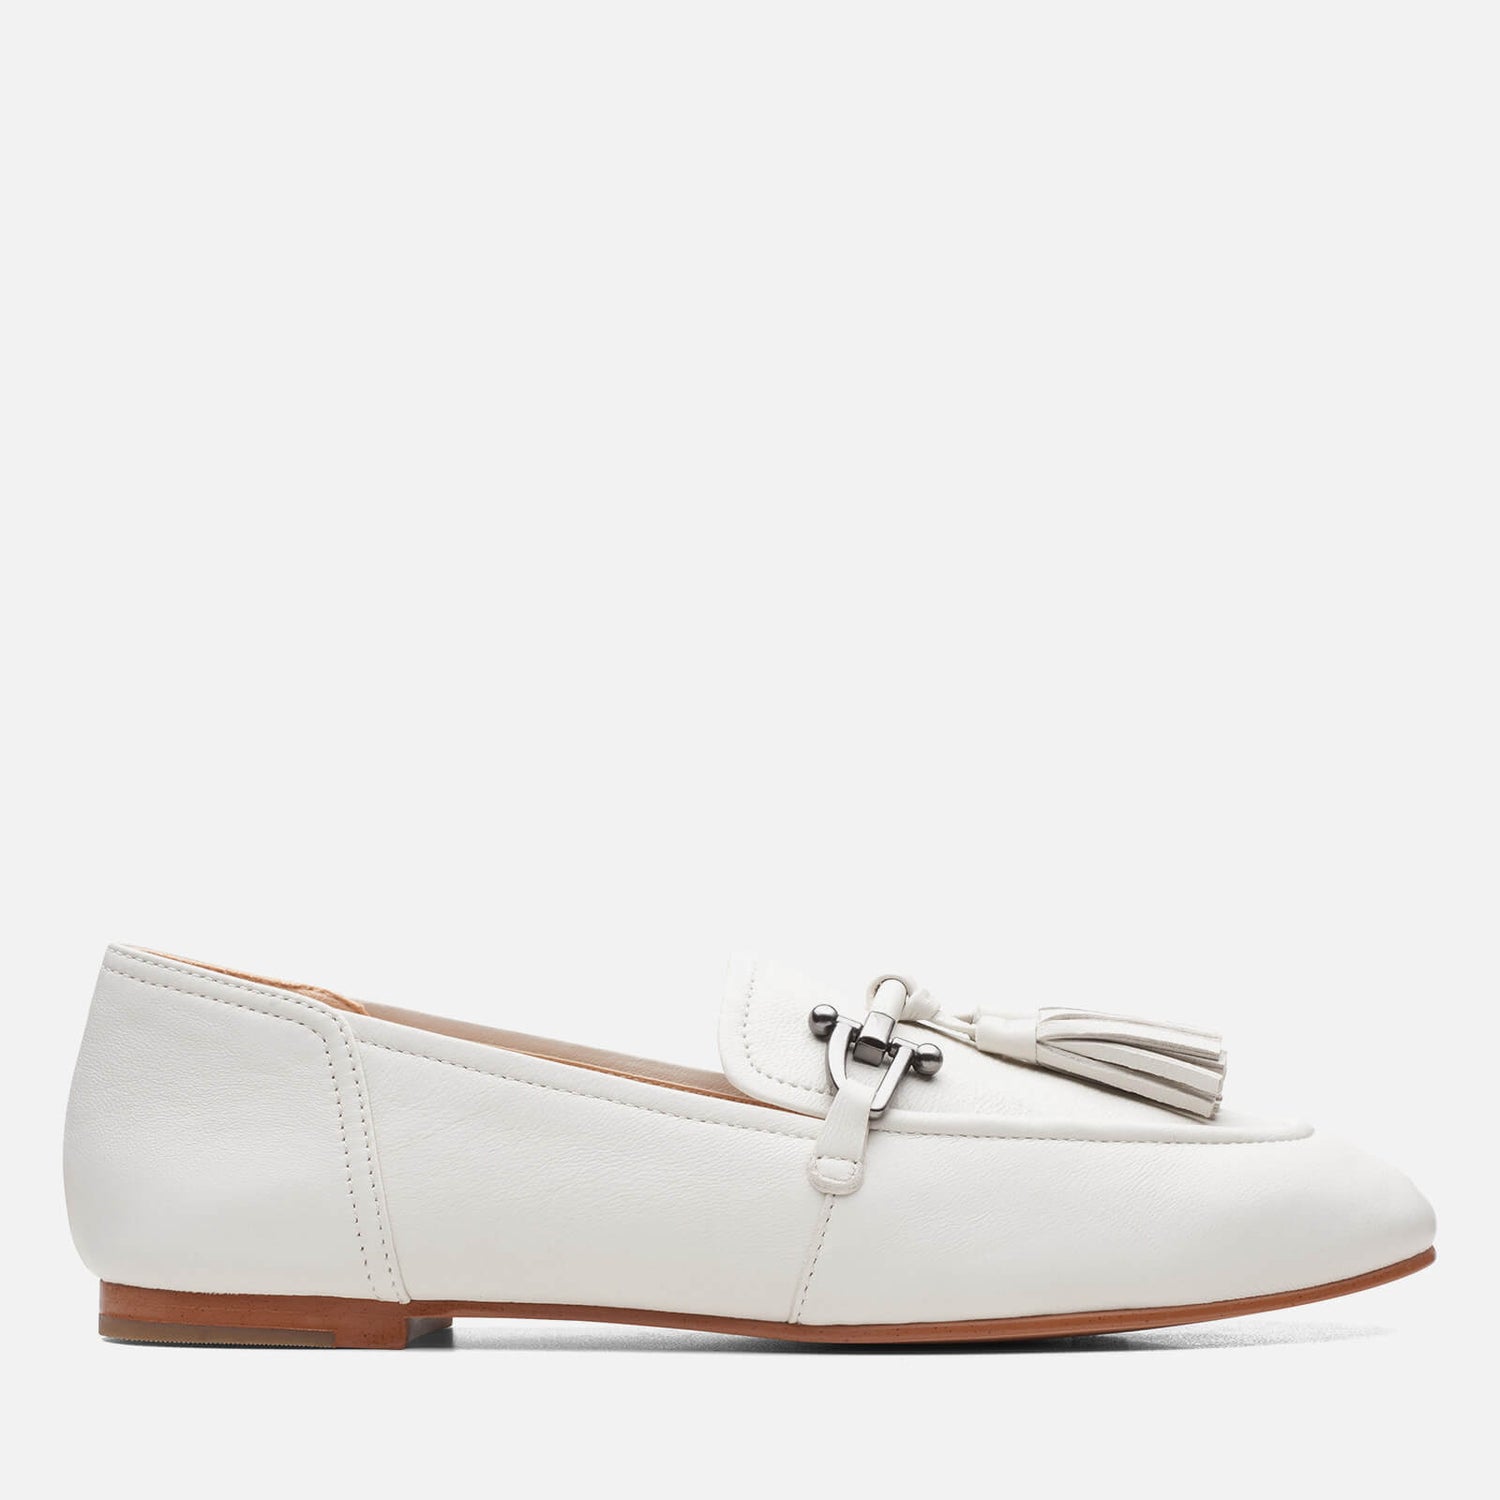 Clarks Women's Pure 2 Tassle Leather Loafers - White - UK 3